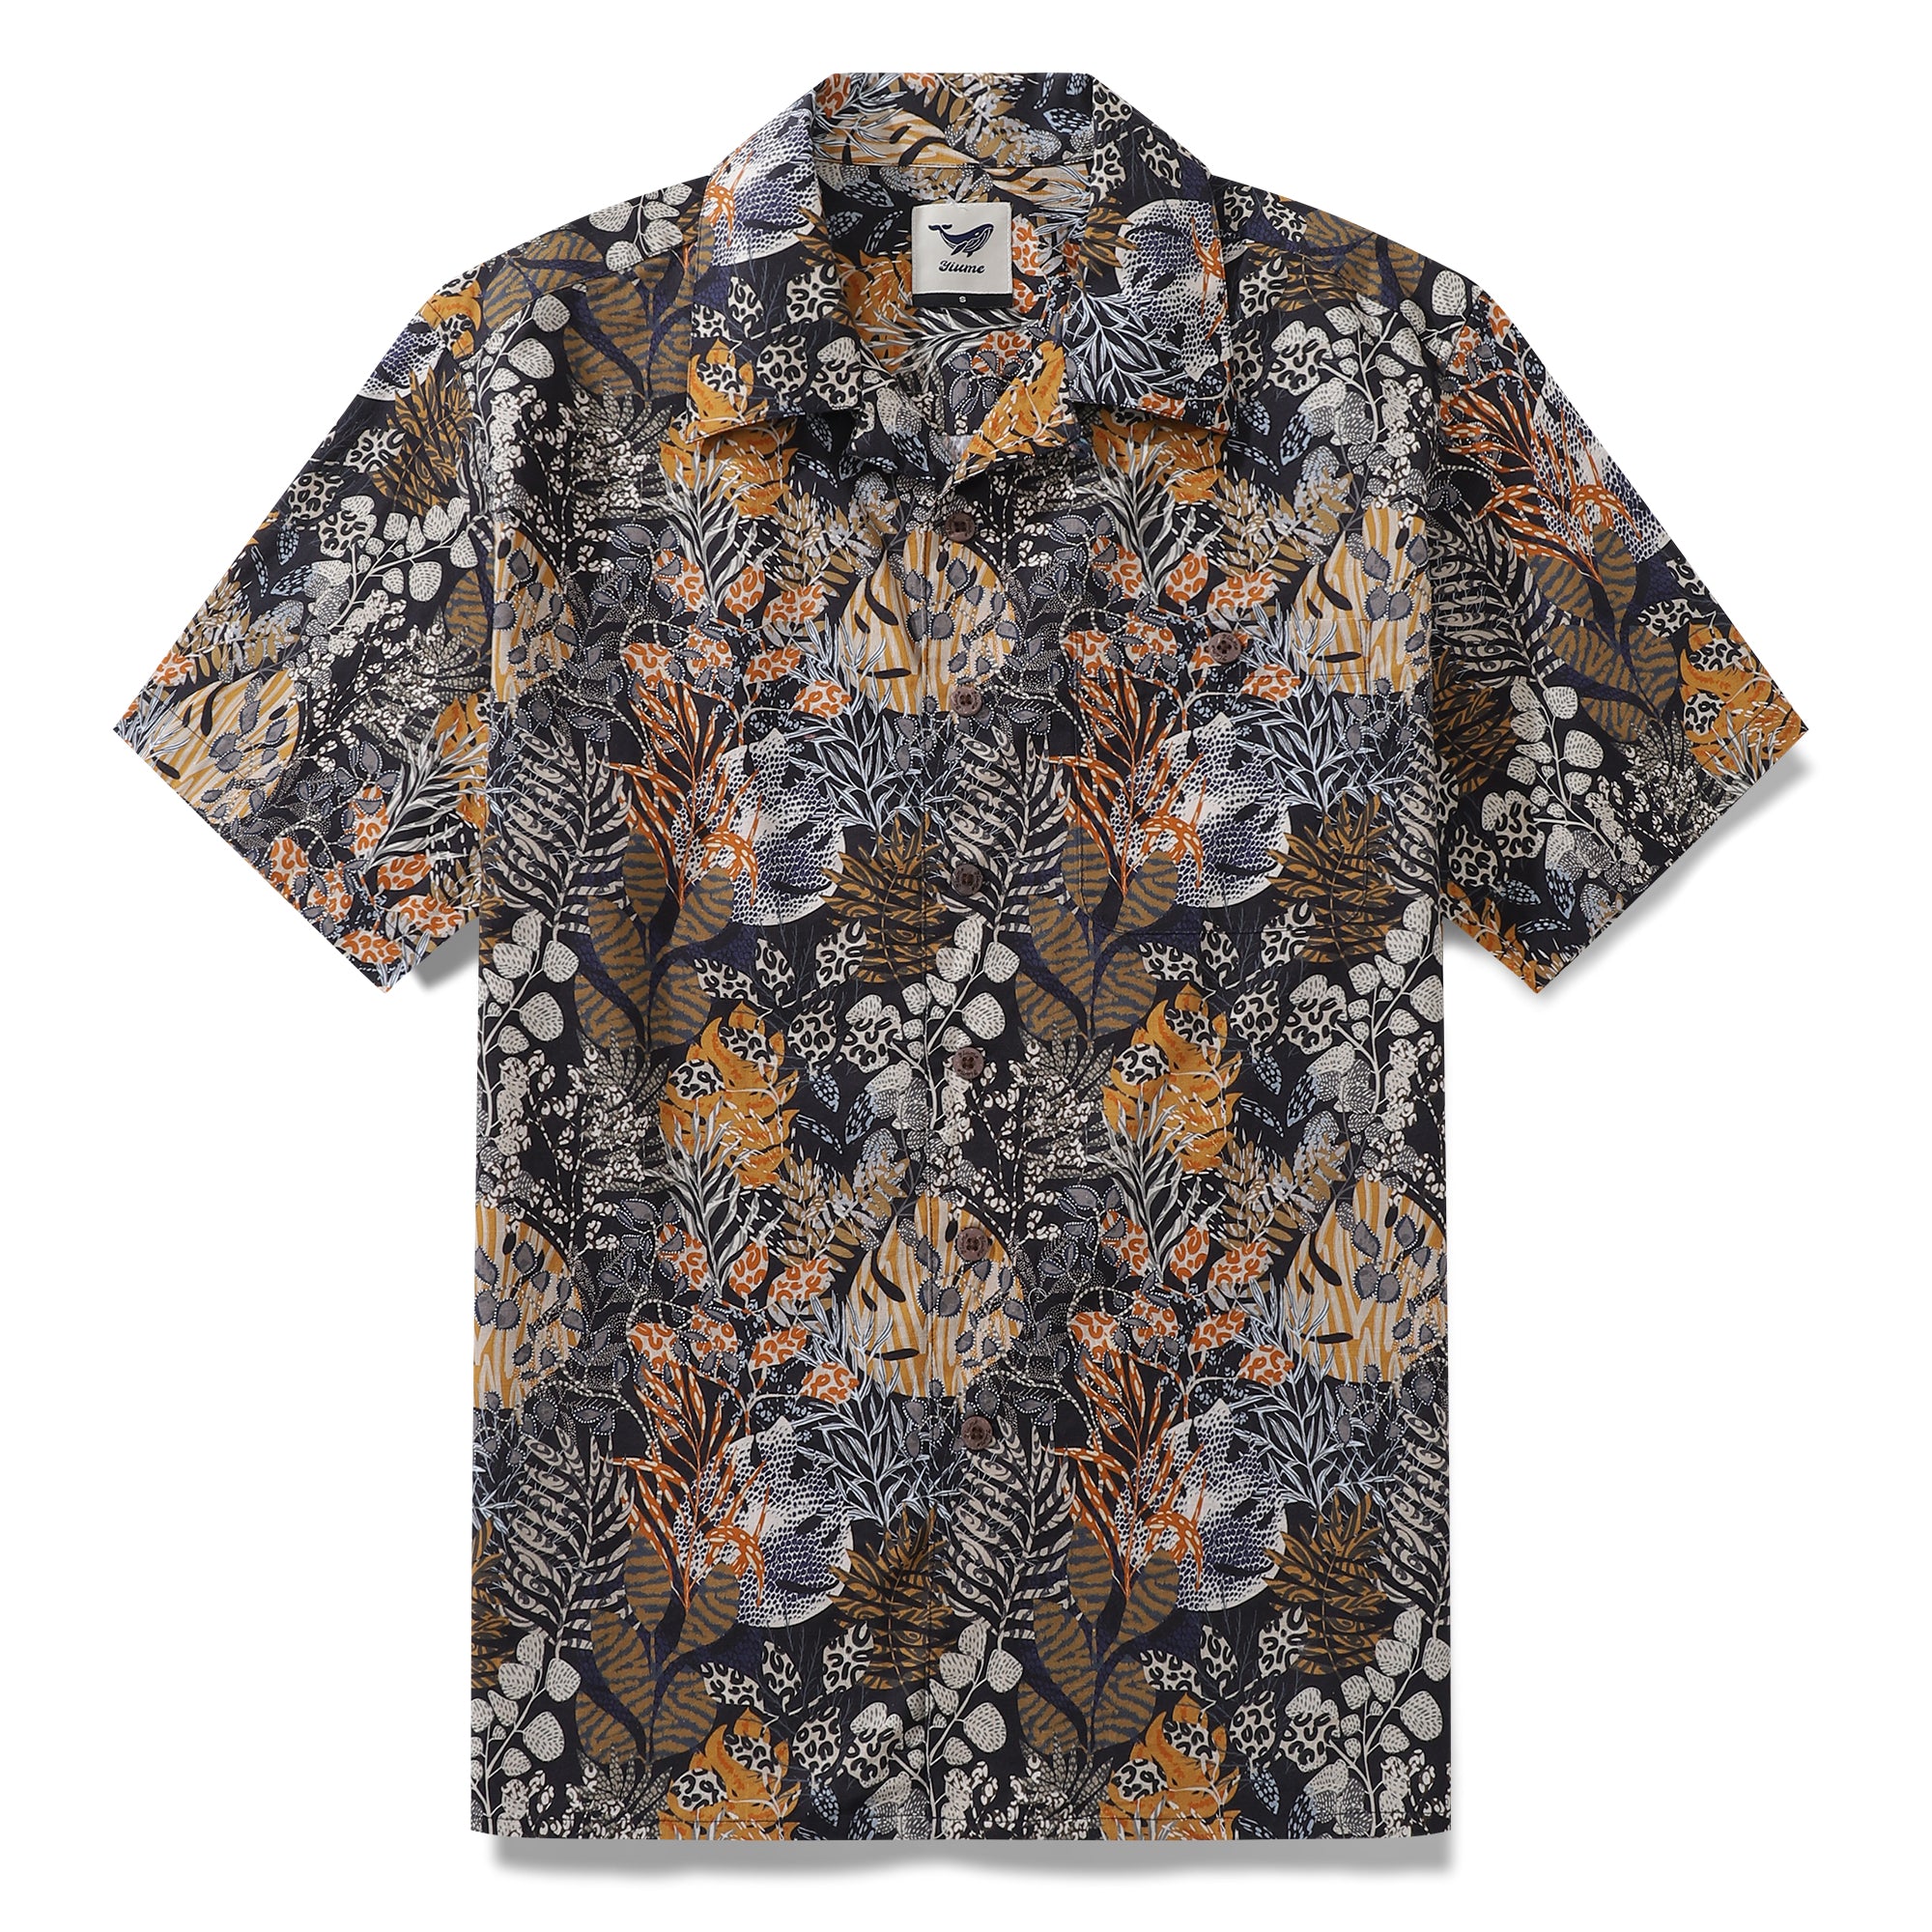 Hawaiian Shirt For Men Animal Pattern Leaves By Annick Shirt Camp Collar 100% Cotton